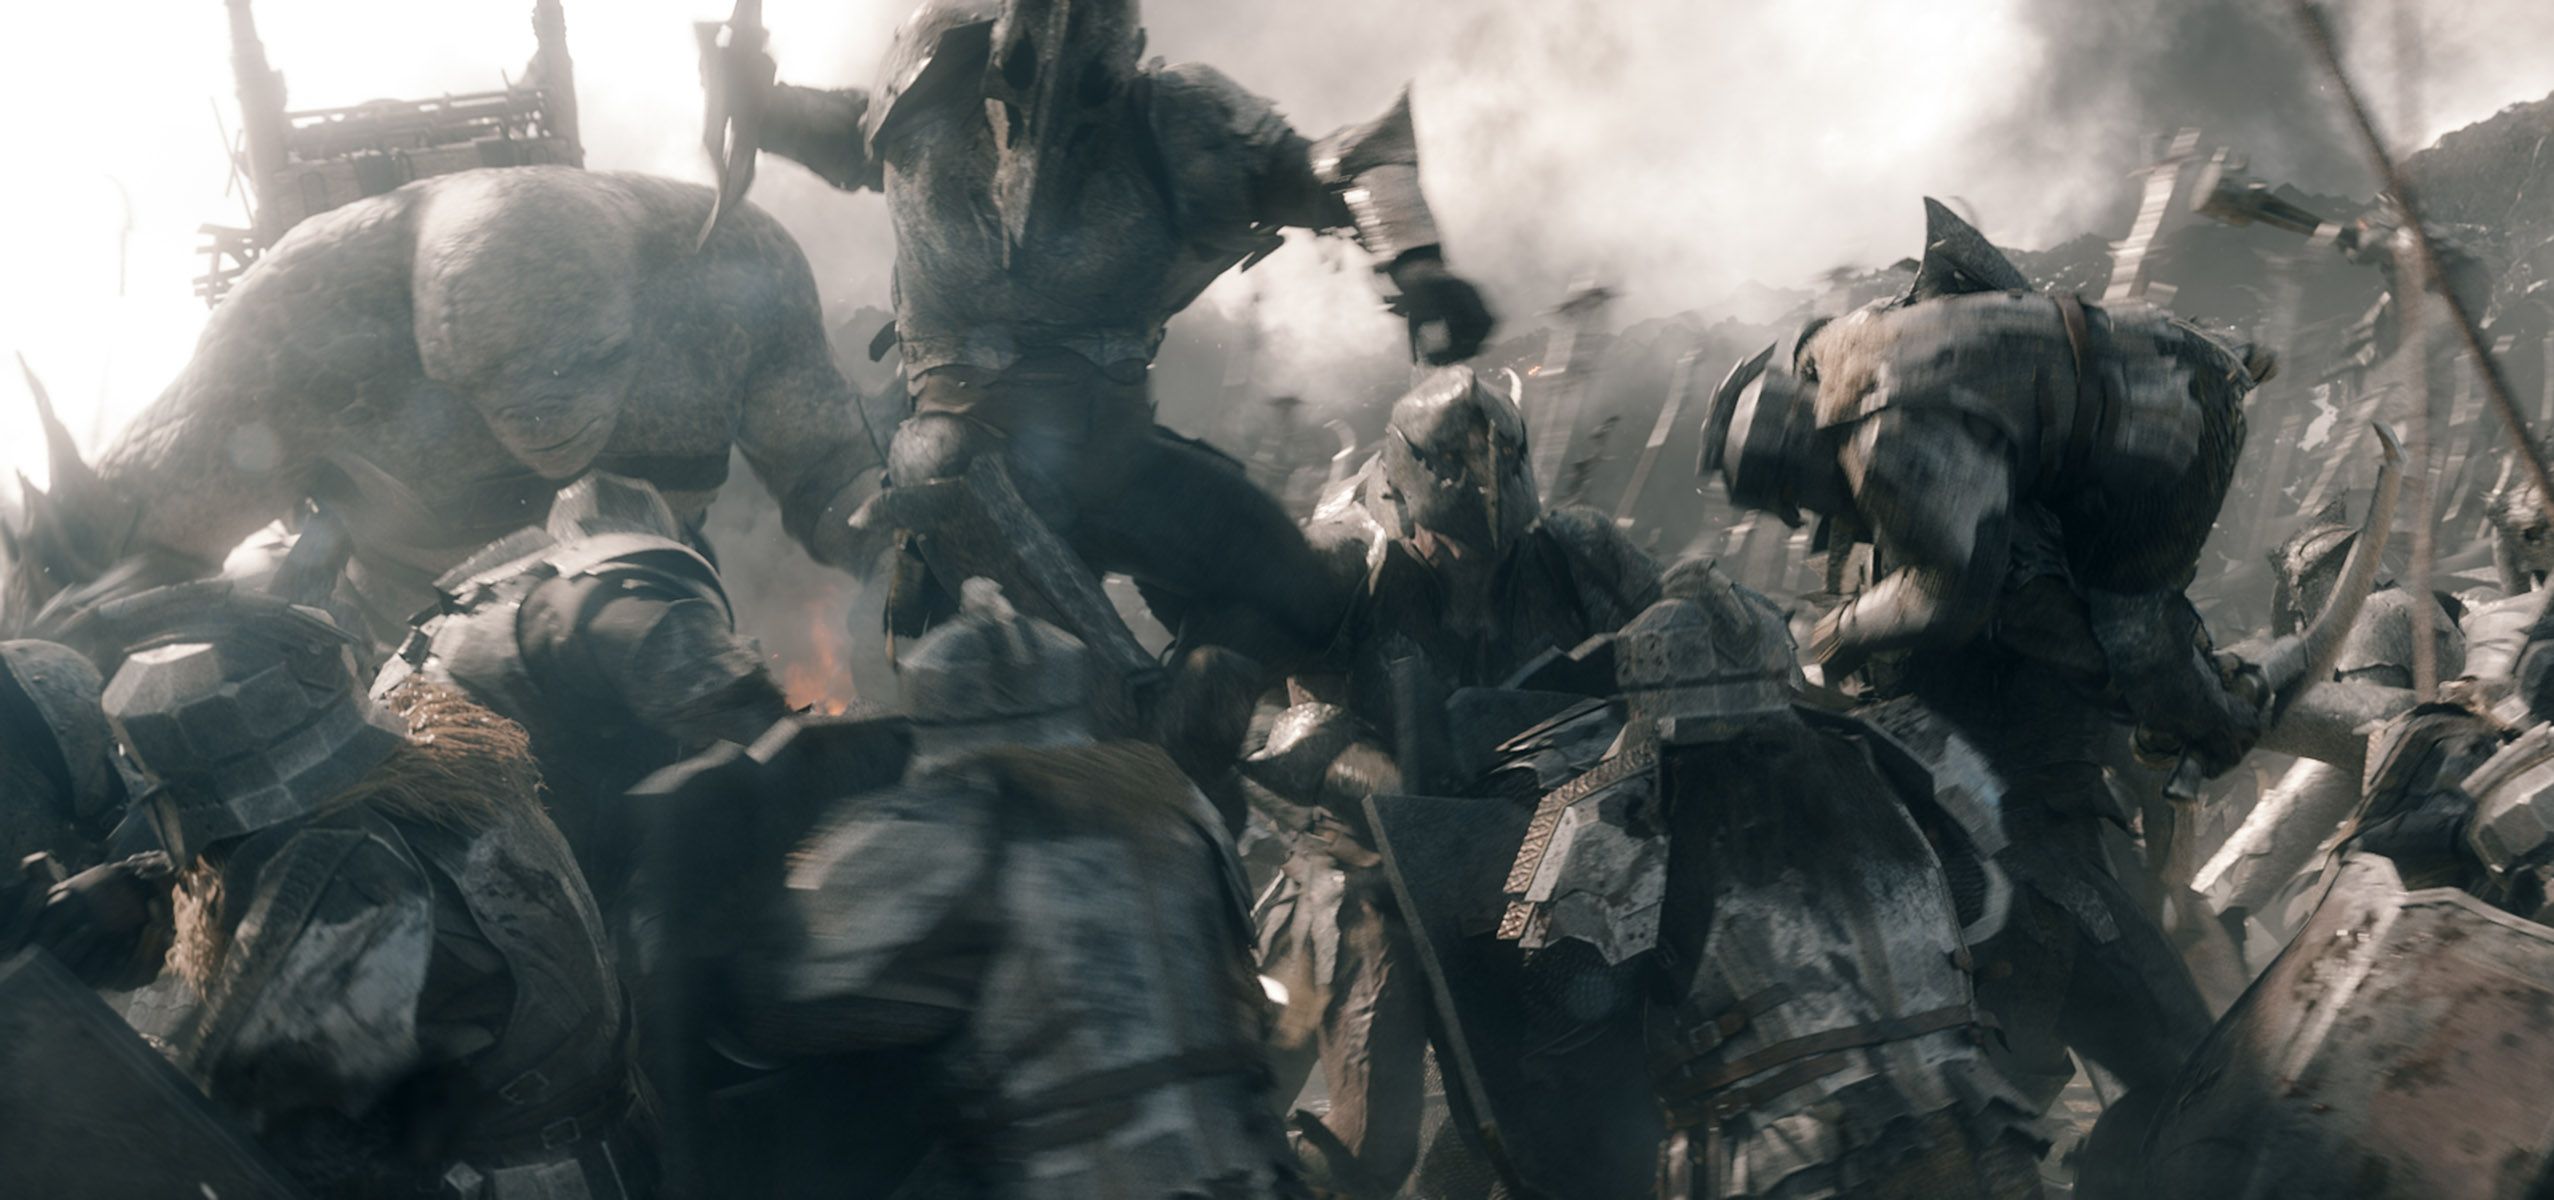 The Battle of the Five Armies war action scene